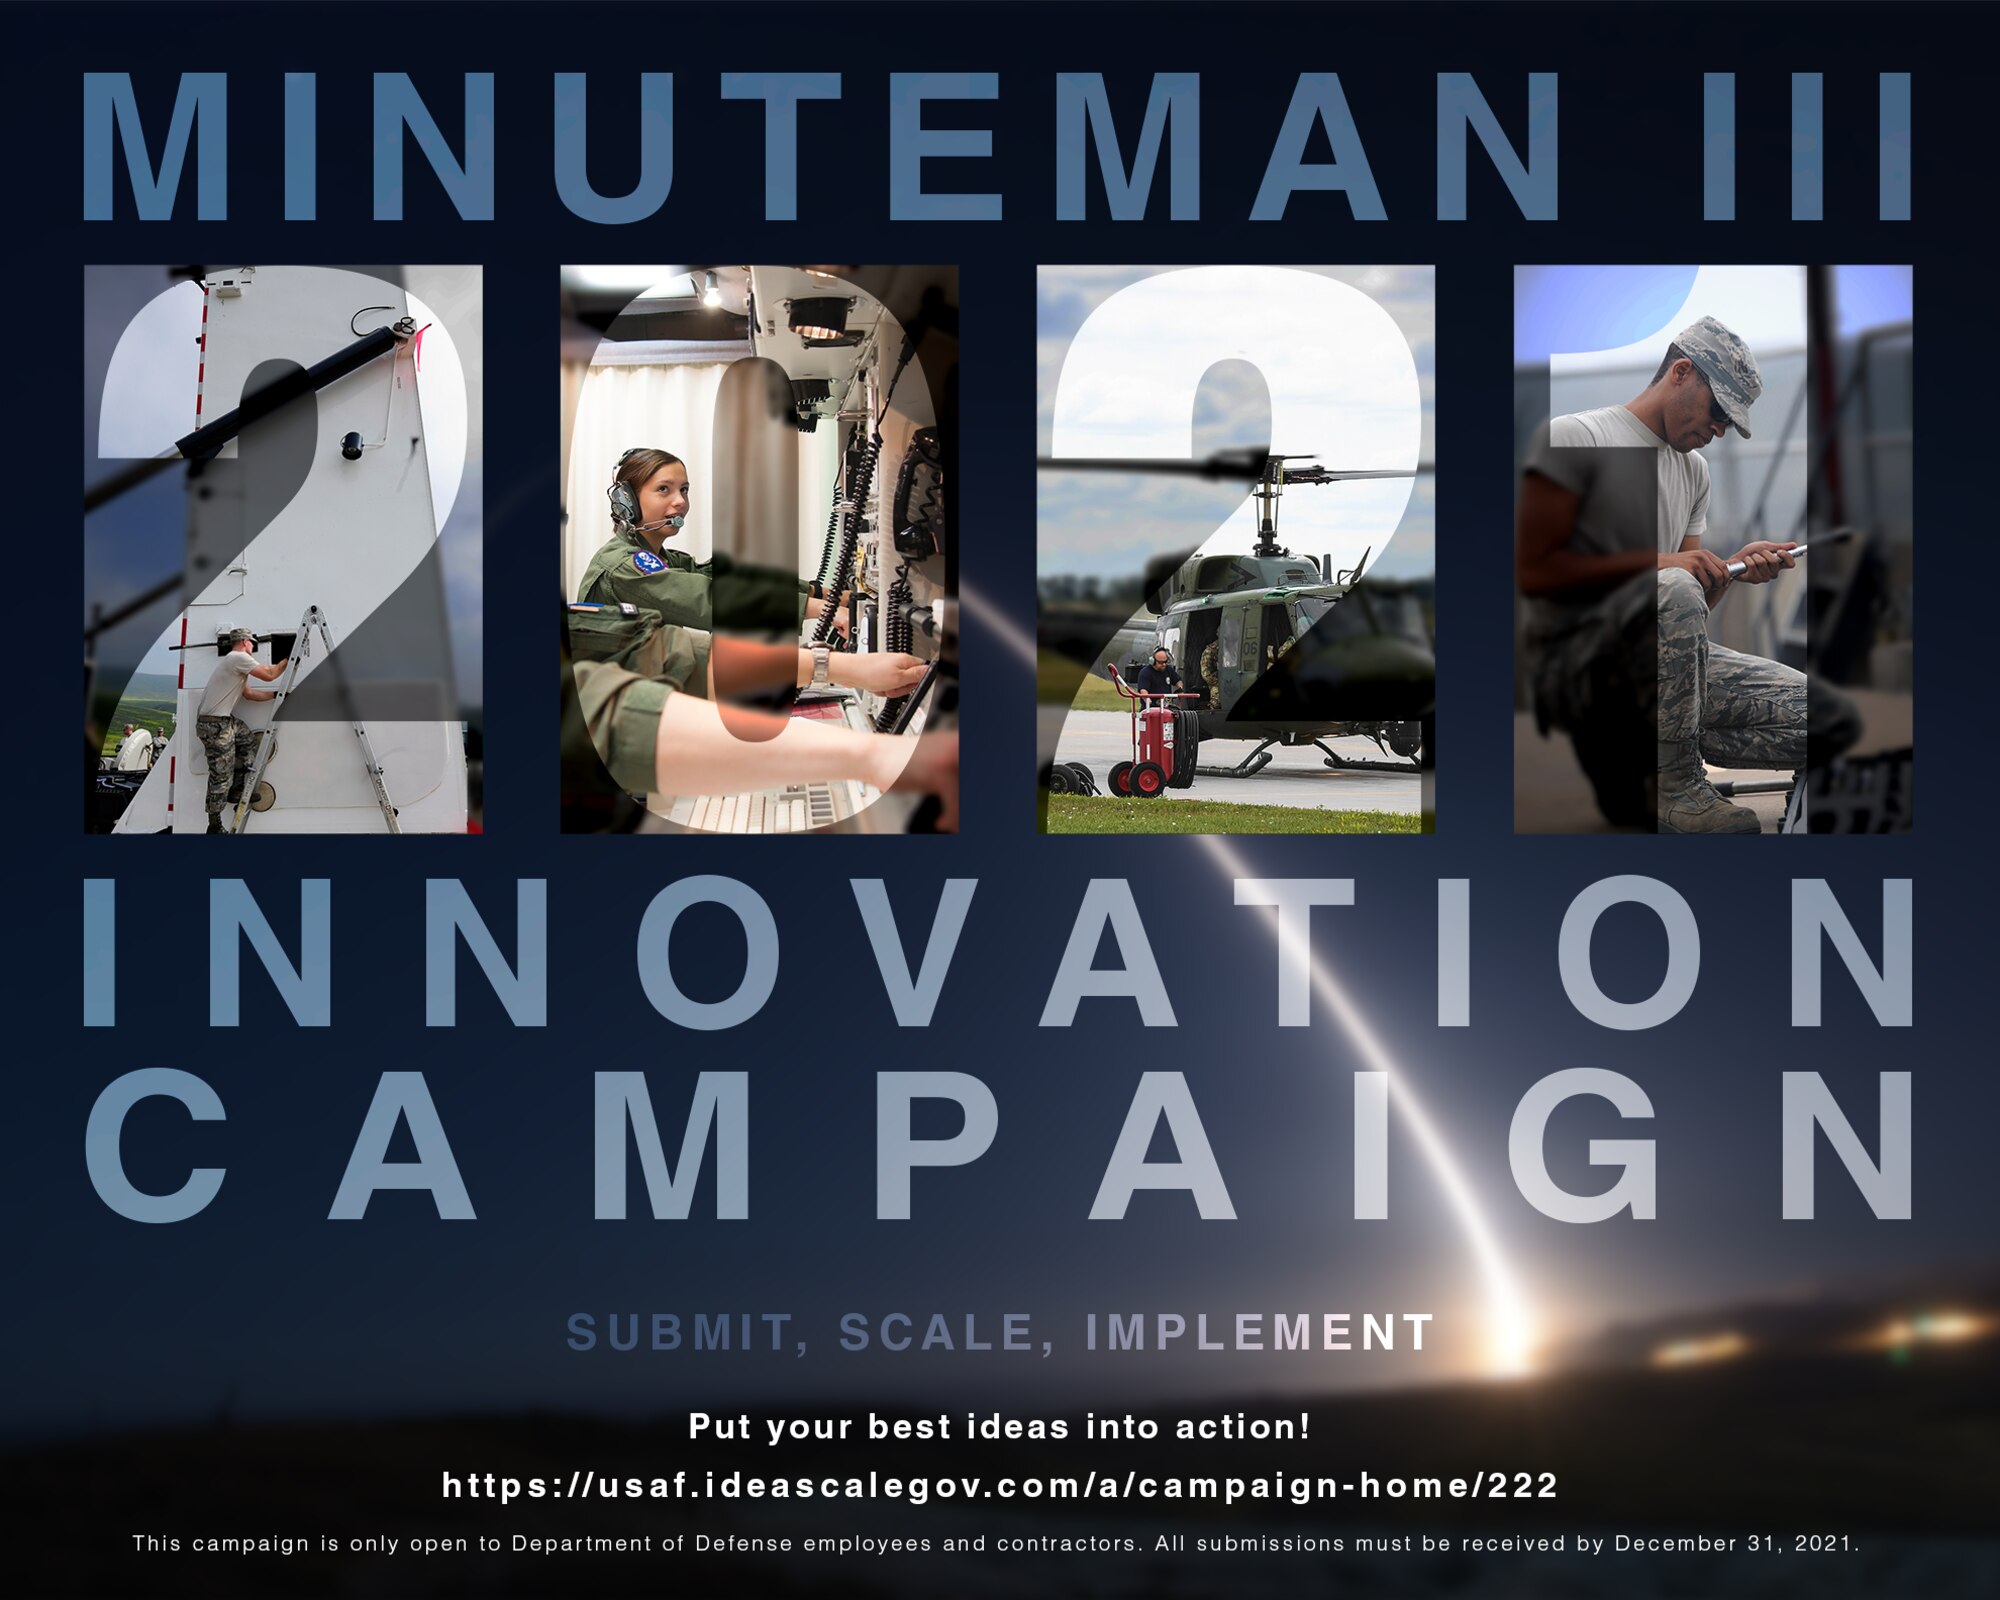 The campaign is open through Dec. 31, 2021 to DoD employees and contractors, who can submit their ideas and view other submissions at https://usaf.ideascalegov.com/a/campaign-home/222. (Artwork by Capt. Austin Troya)